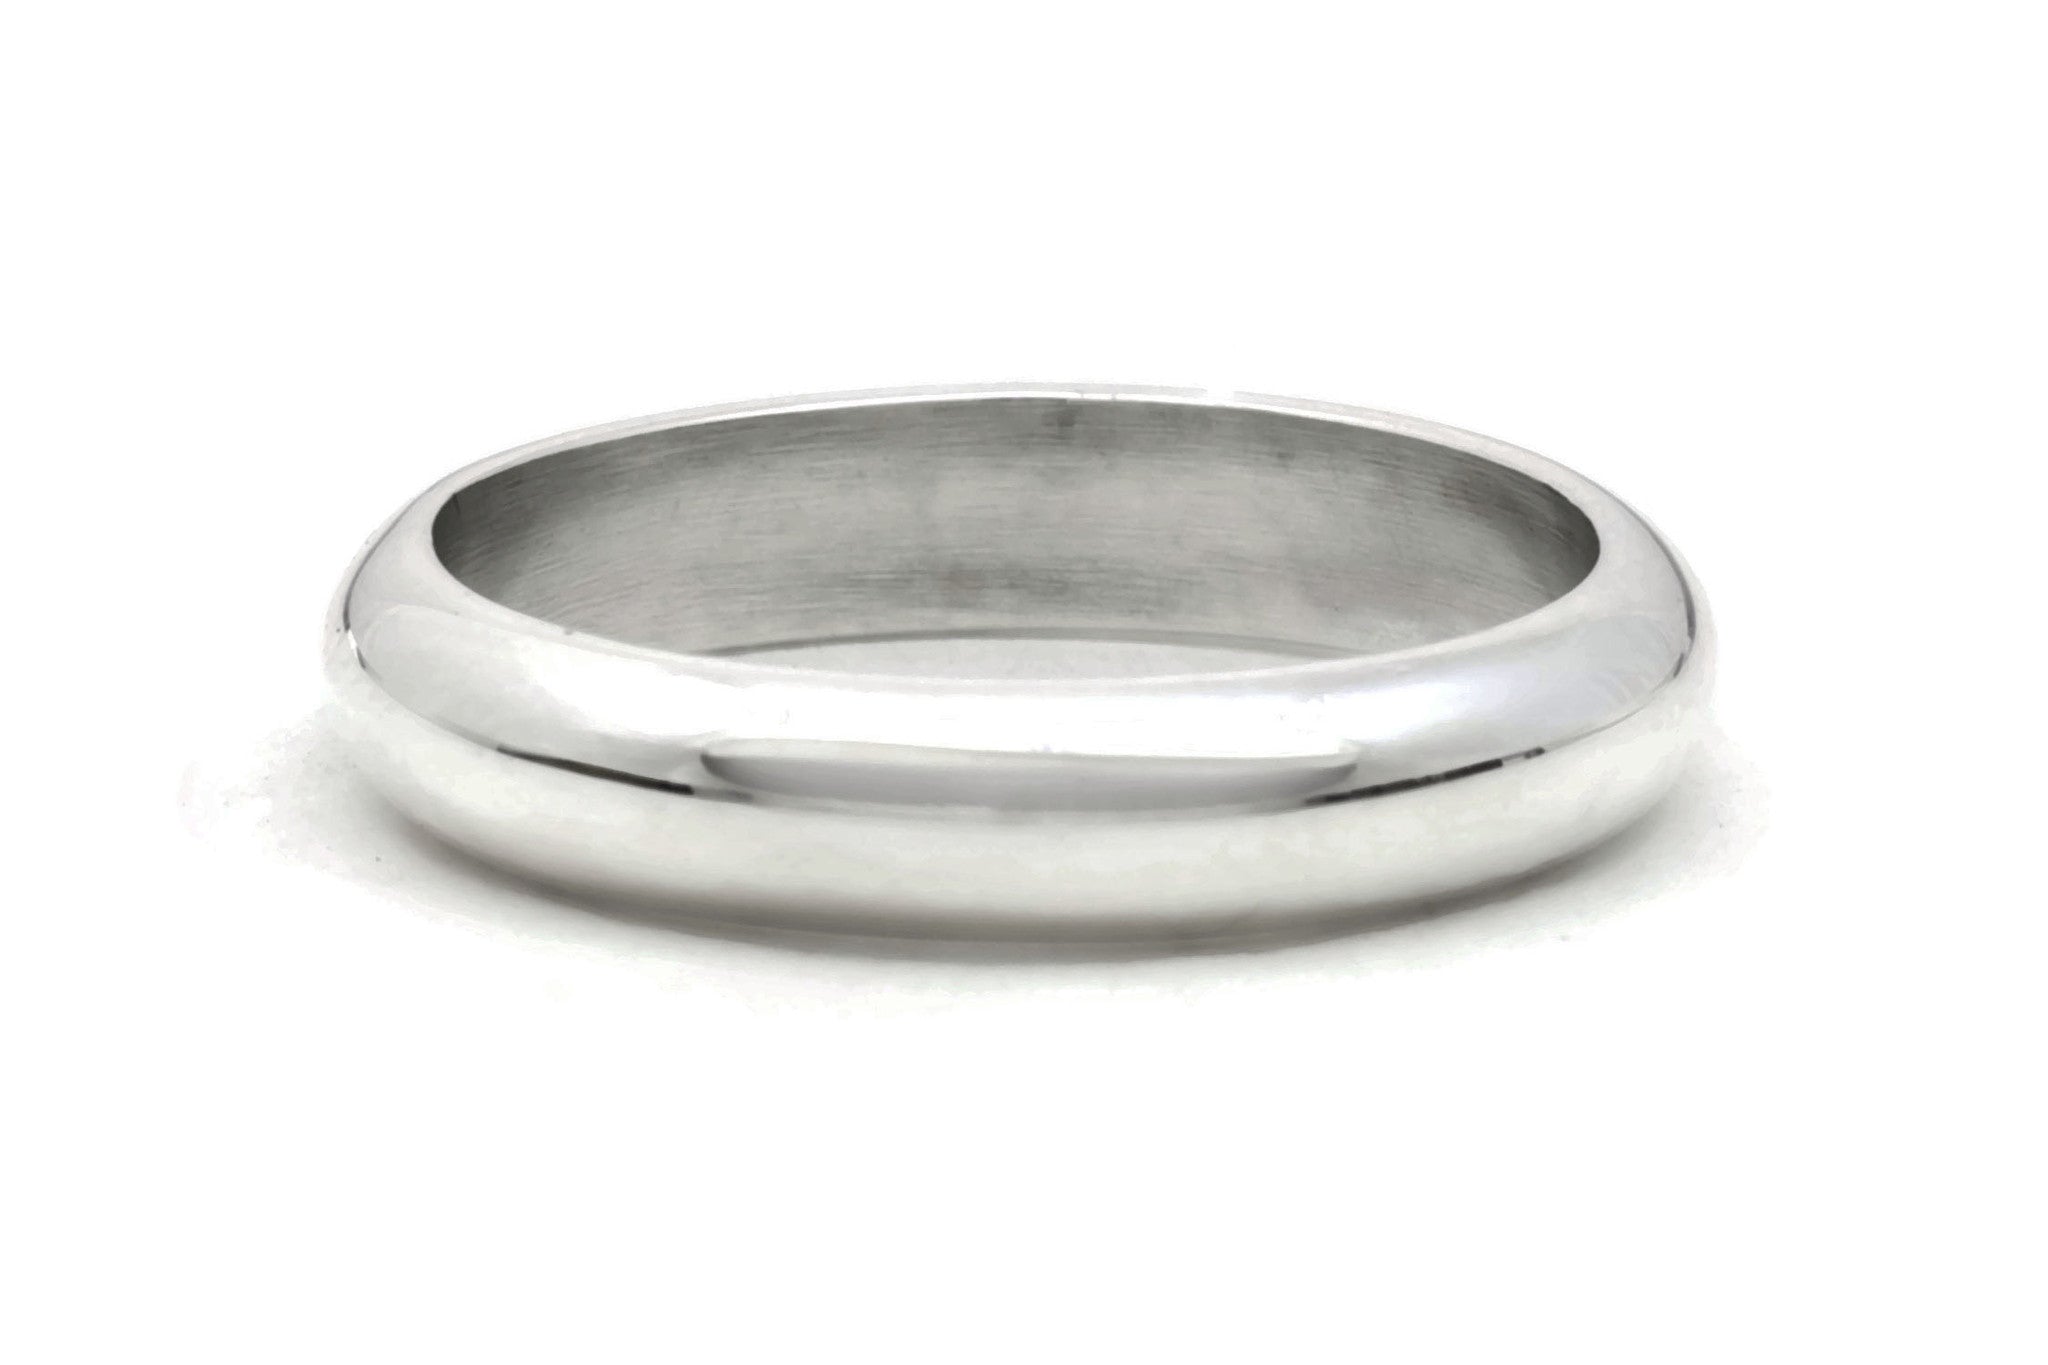 Tarnish Resistant Solid 925 Sterling Silver 5mm Flat Wedding Band Ring Thin  Classic Plain Traditional - Size 7.5 | Amazon.com